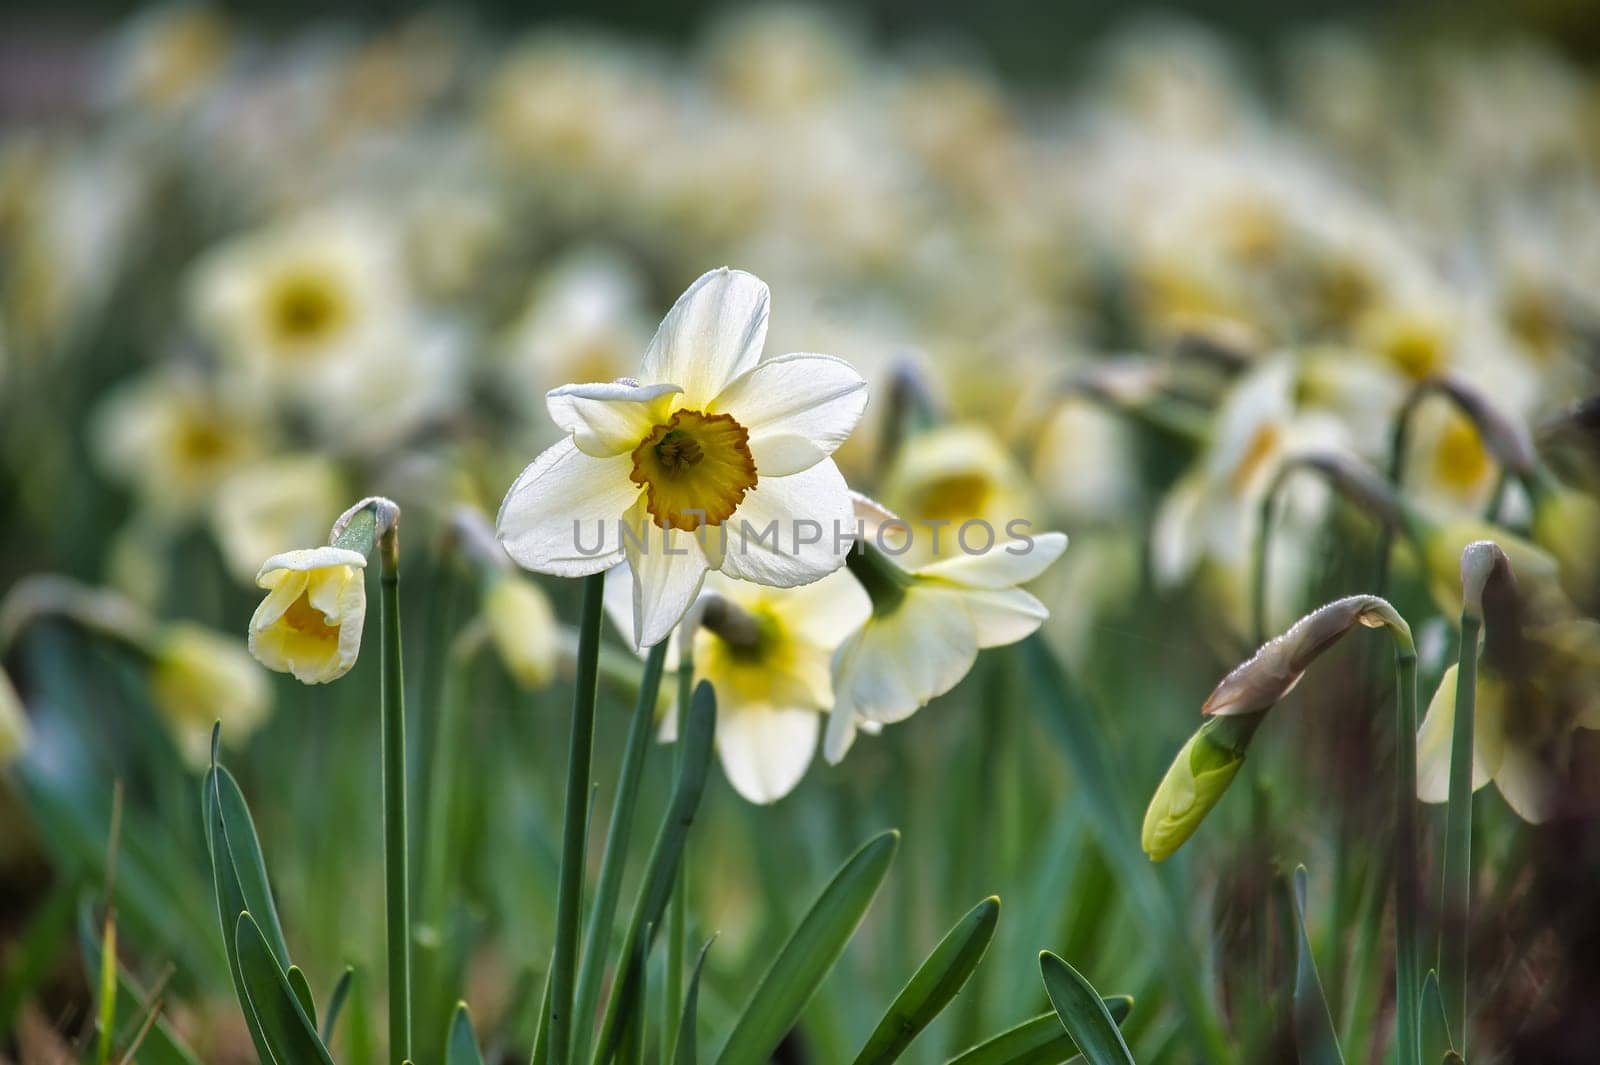 White daffodils also known as narcissus in full bloom, essence of spring with the vibrant appearance and the lively distribution of the white daffodils